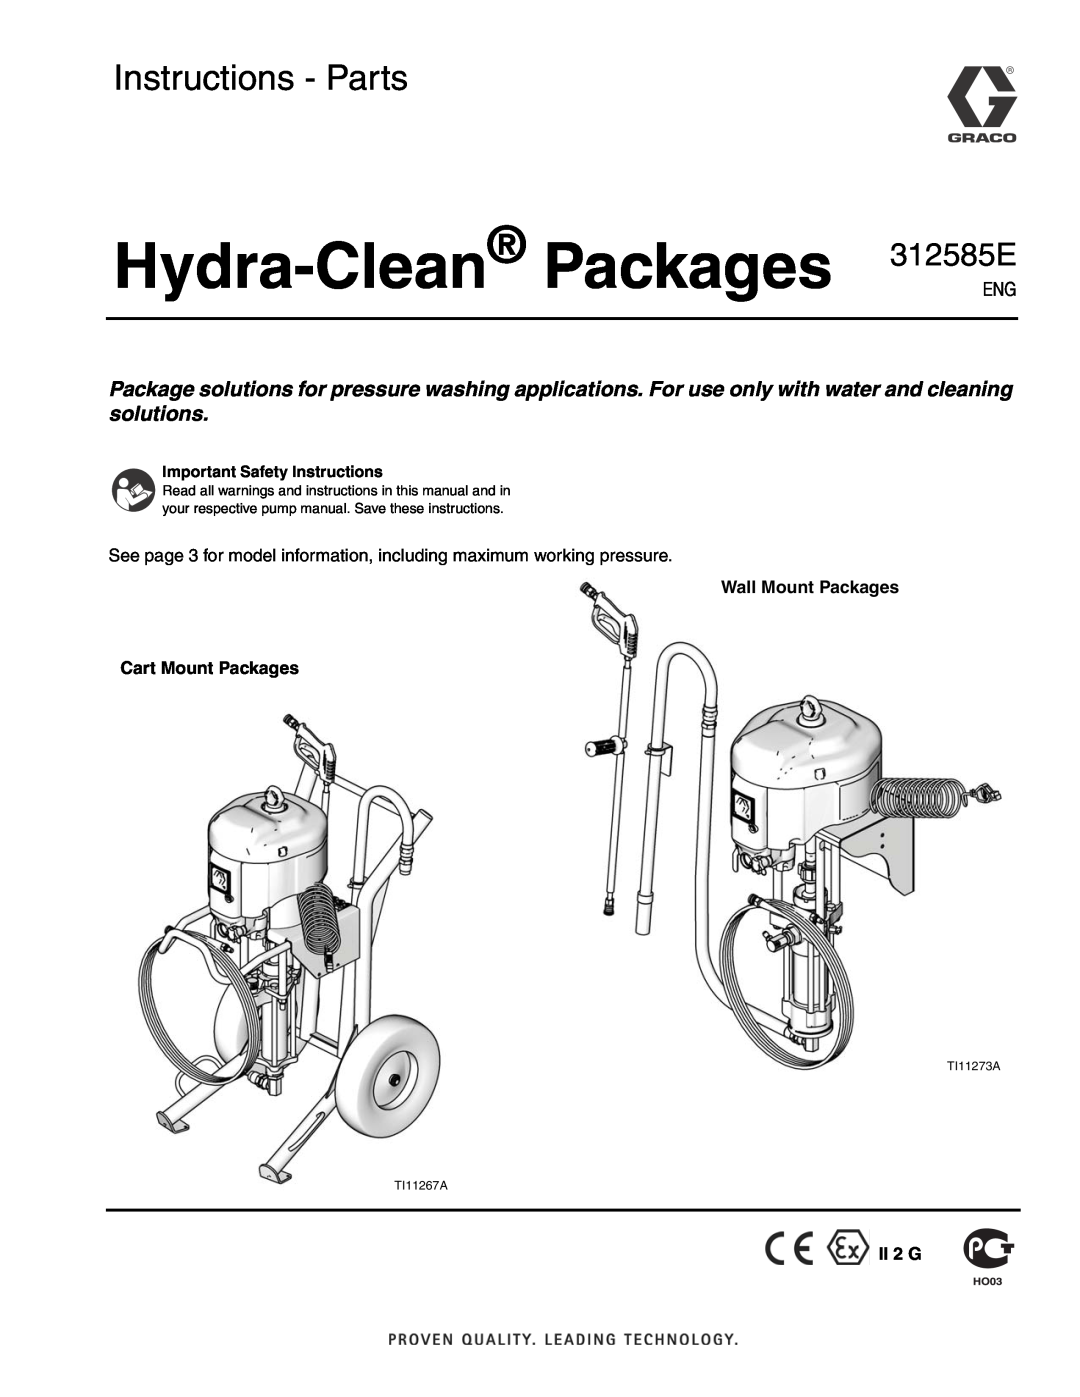 Graco Inc 247552 important safety instructions Hydra-Clean Packages 312585E, Instructions - Parts, TI11273A TI11267A 